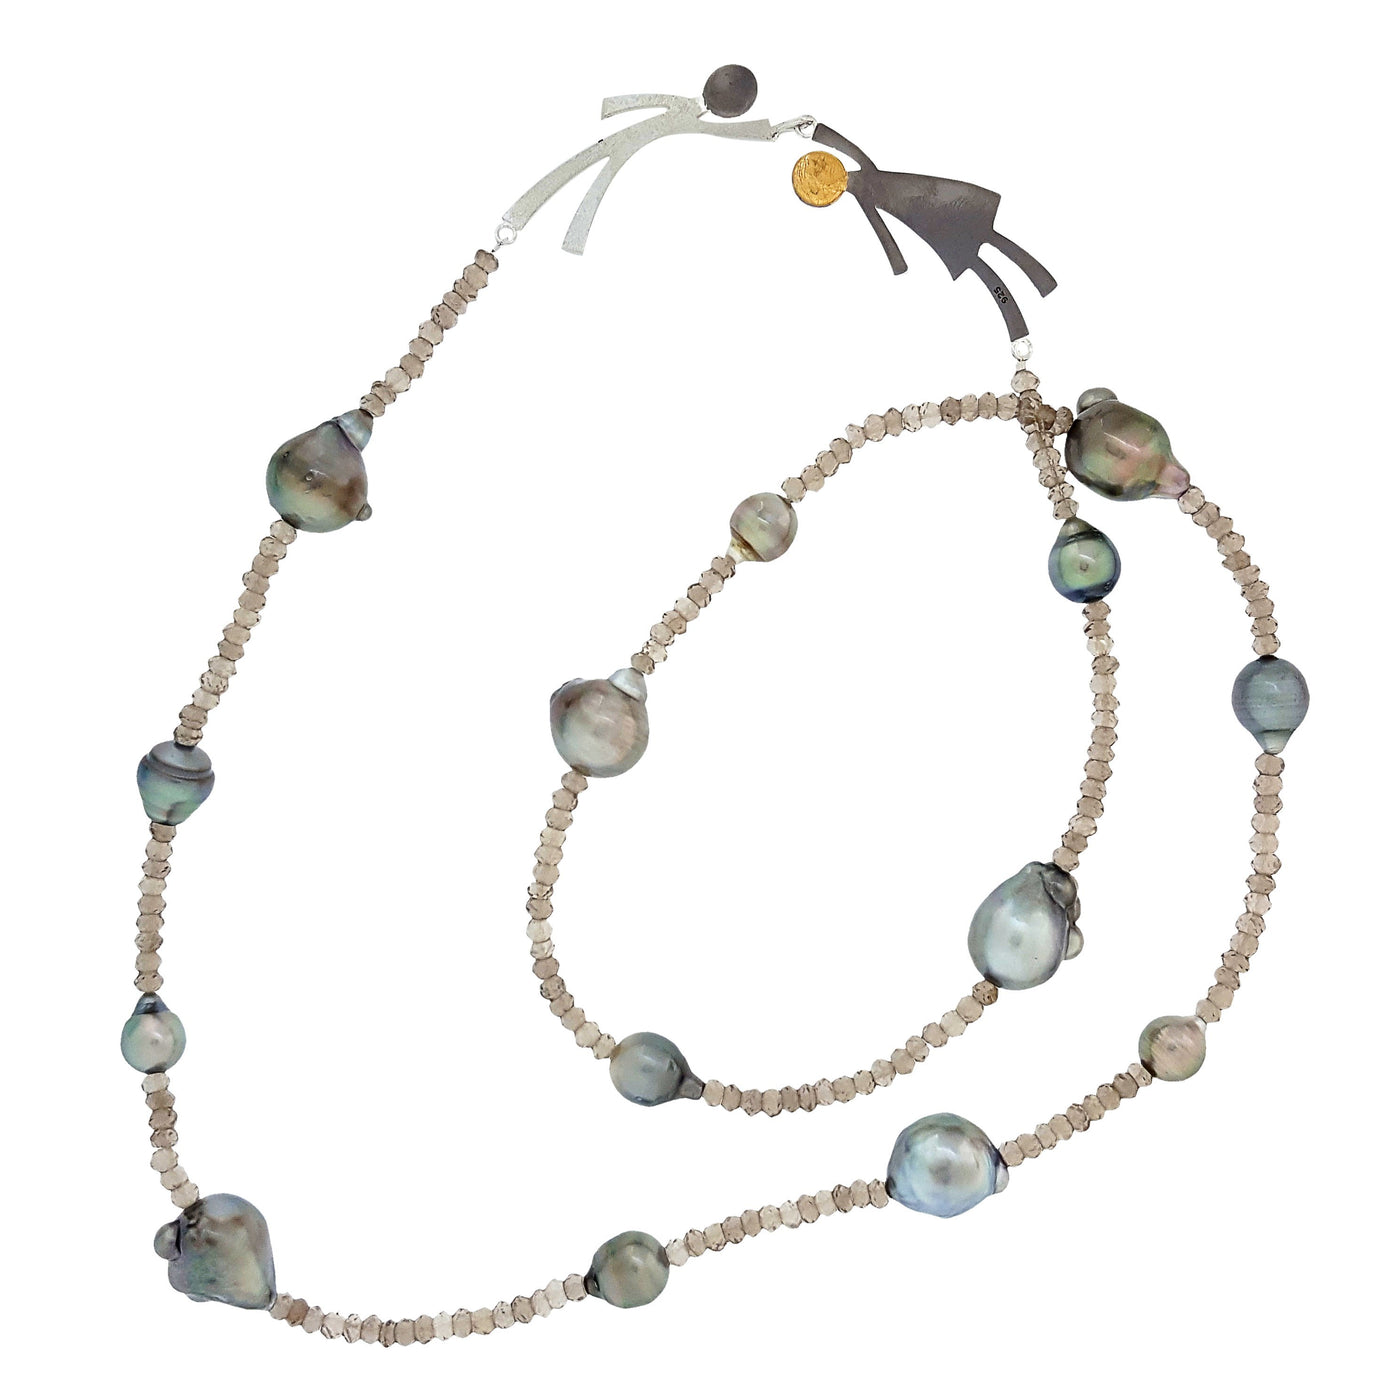 Ruby & Oliver Baroque Necklace 'Smoky Quartz' Tahitian pearls- The Courthouse Collection